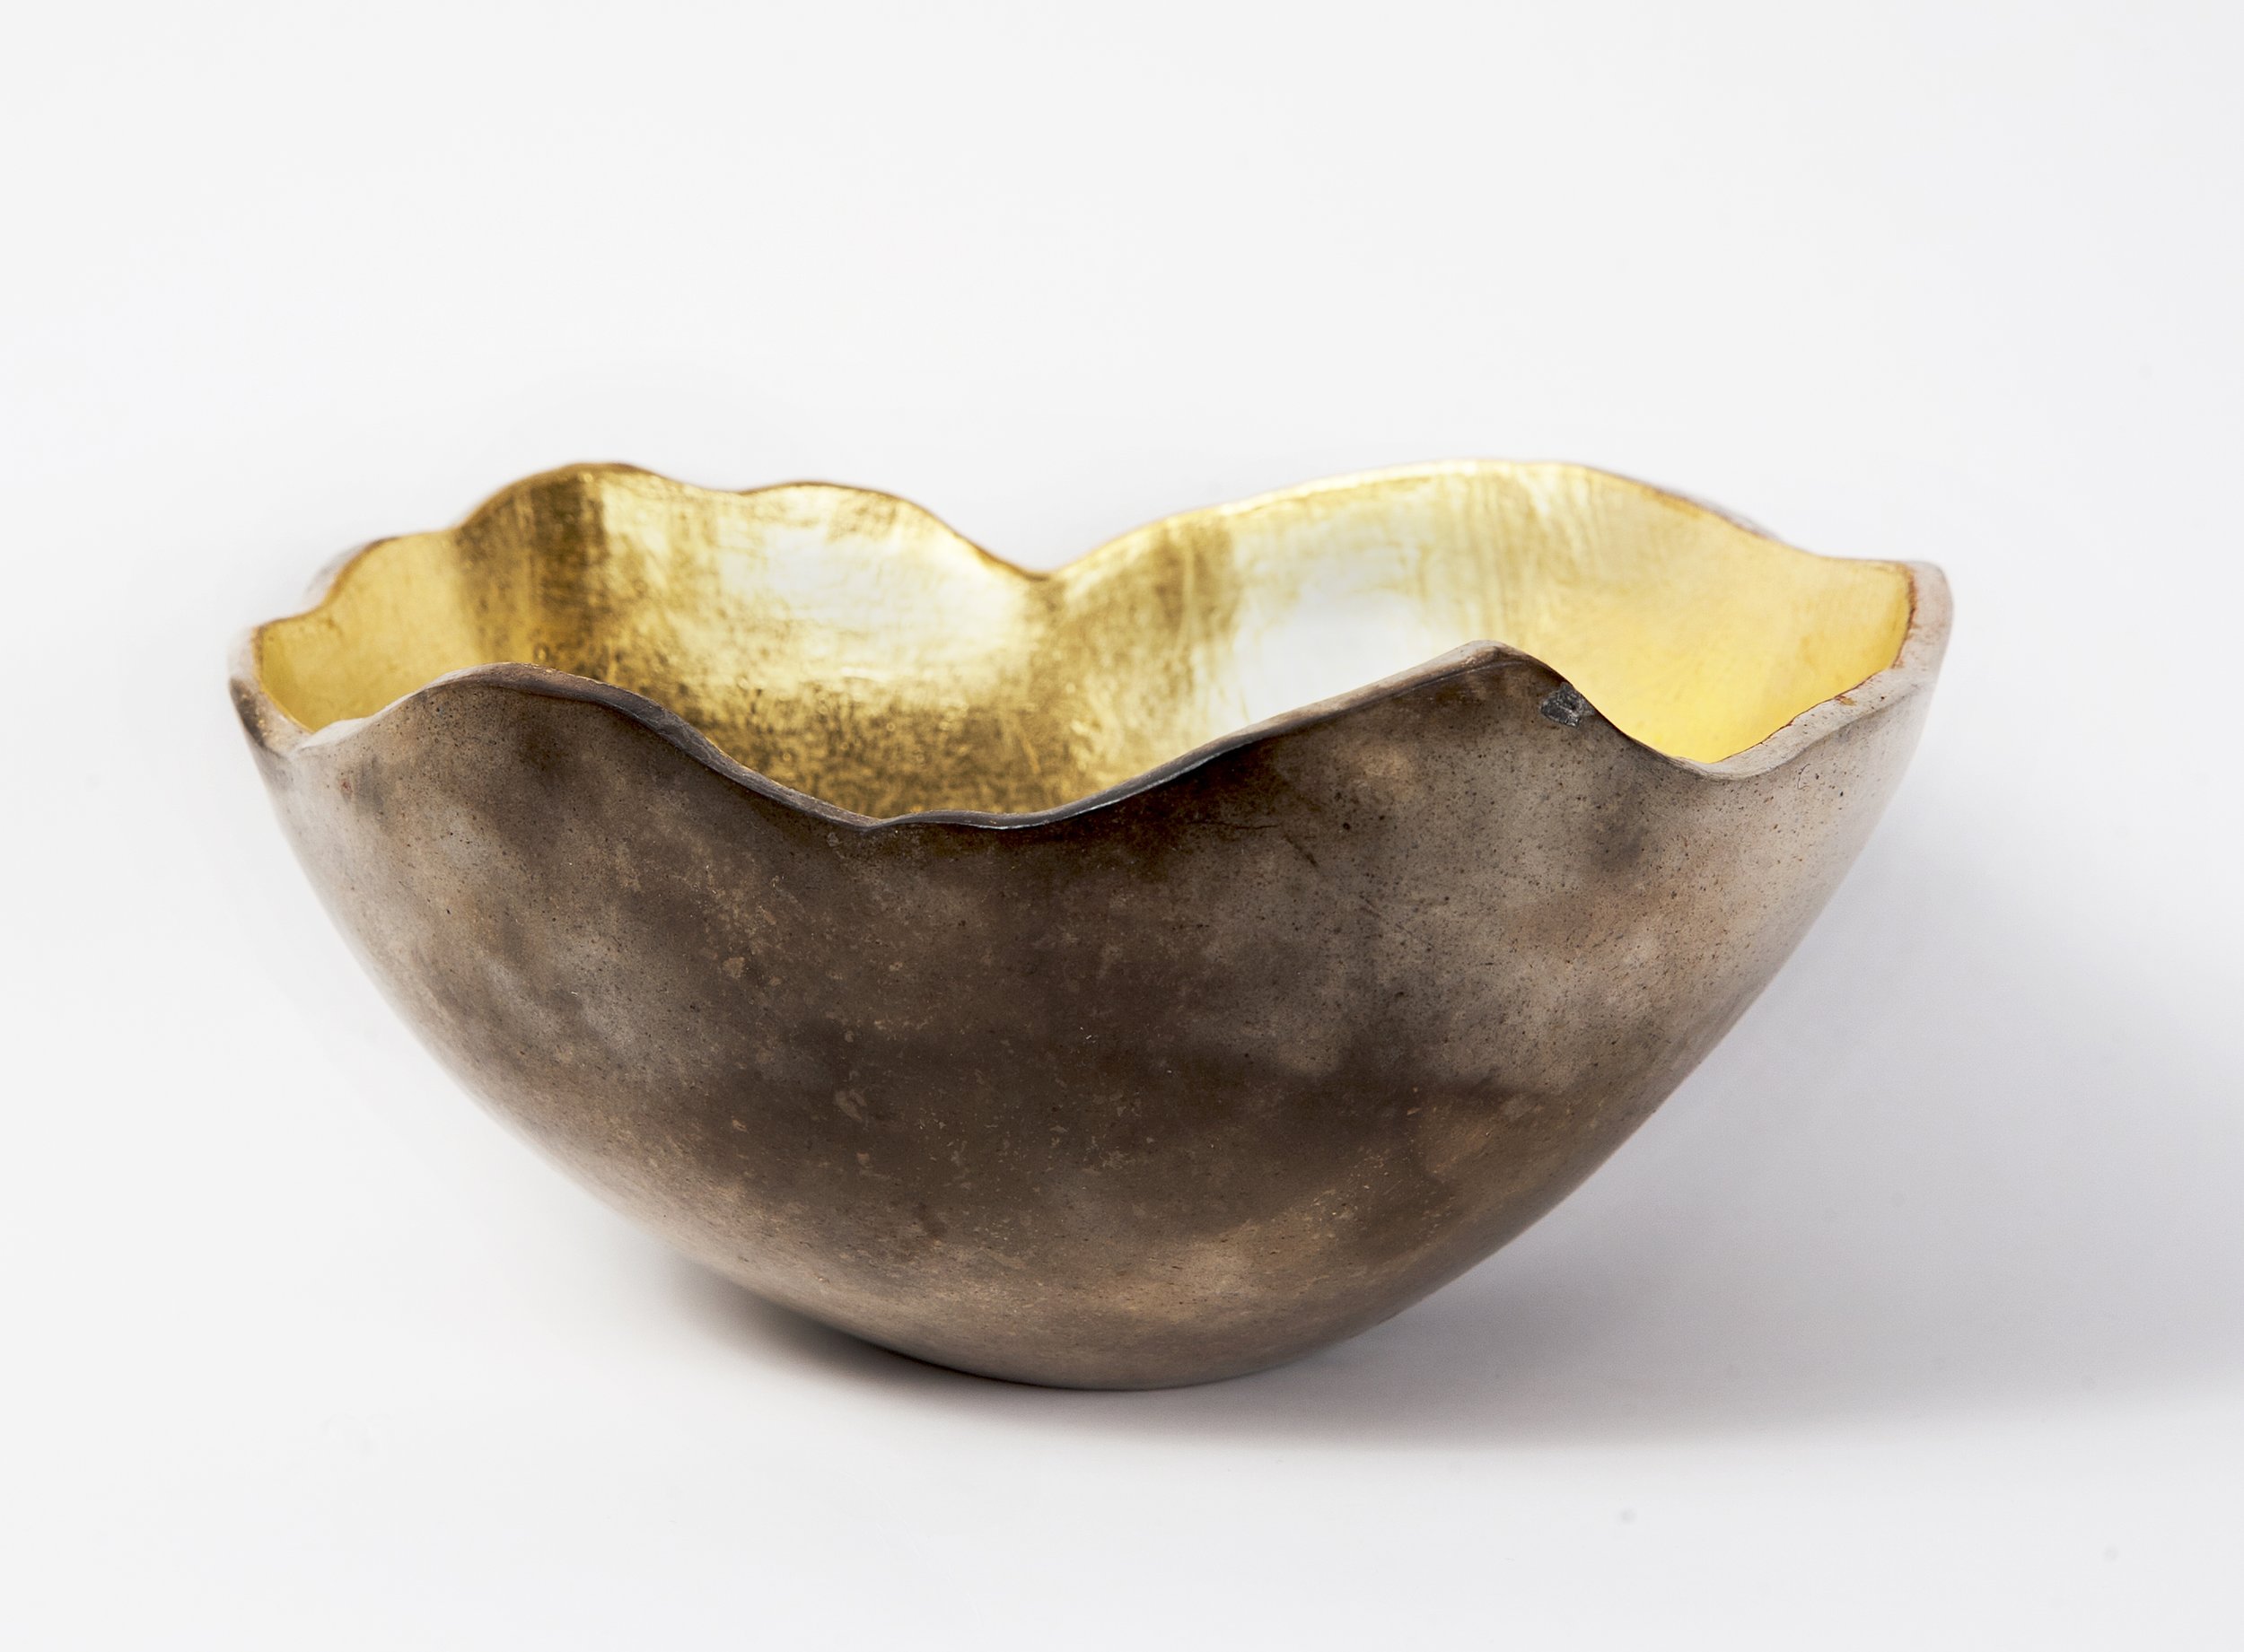 07.Syma_Covello Pot of Gold_2023_smoke-fired clay with 24k gold leaf_3x6.5x6.25 inches_$800.jpg